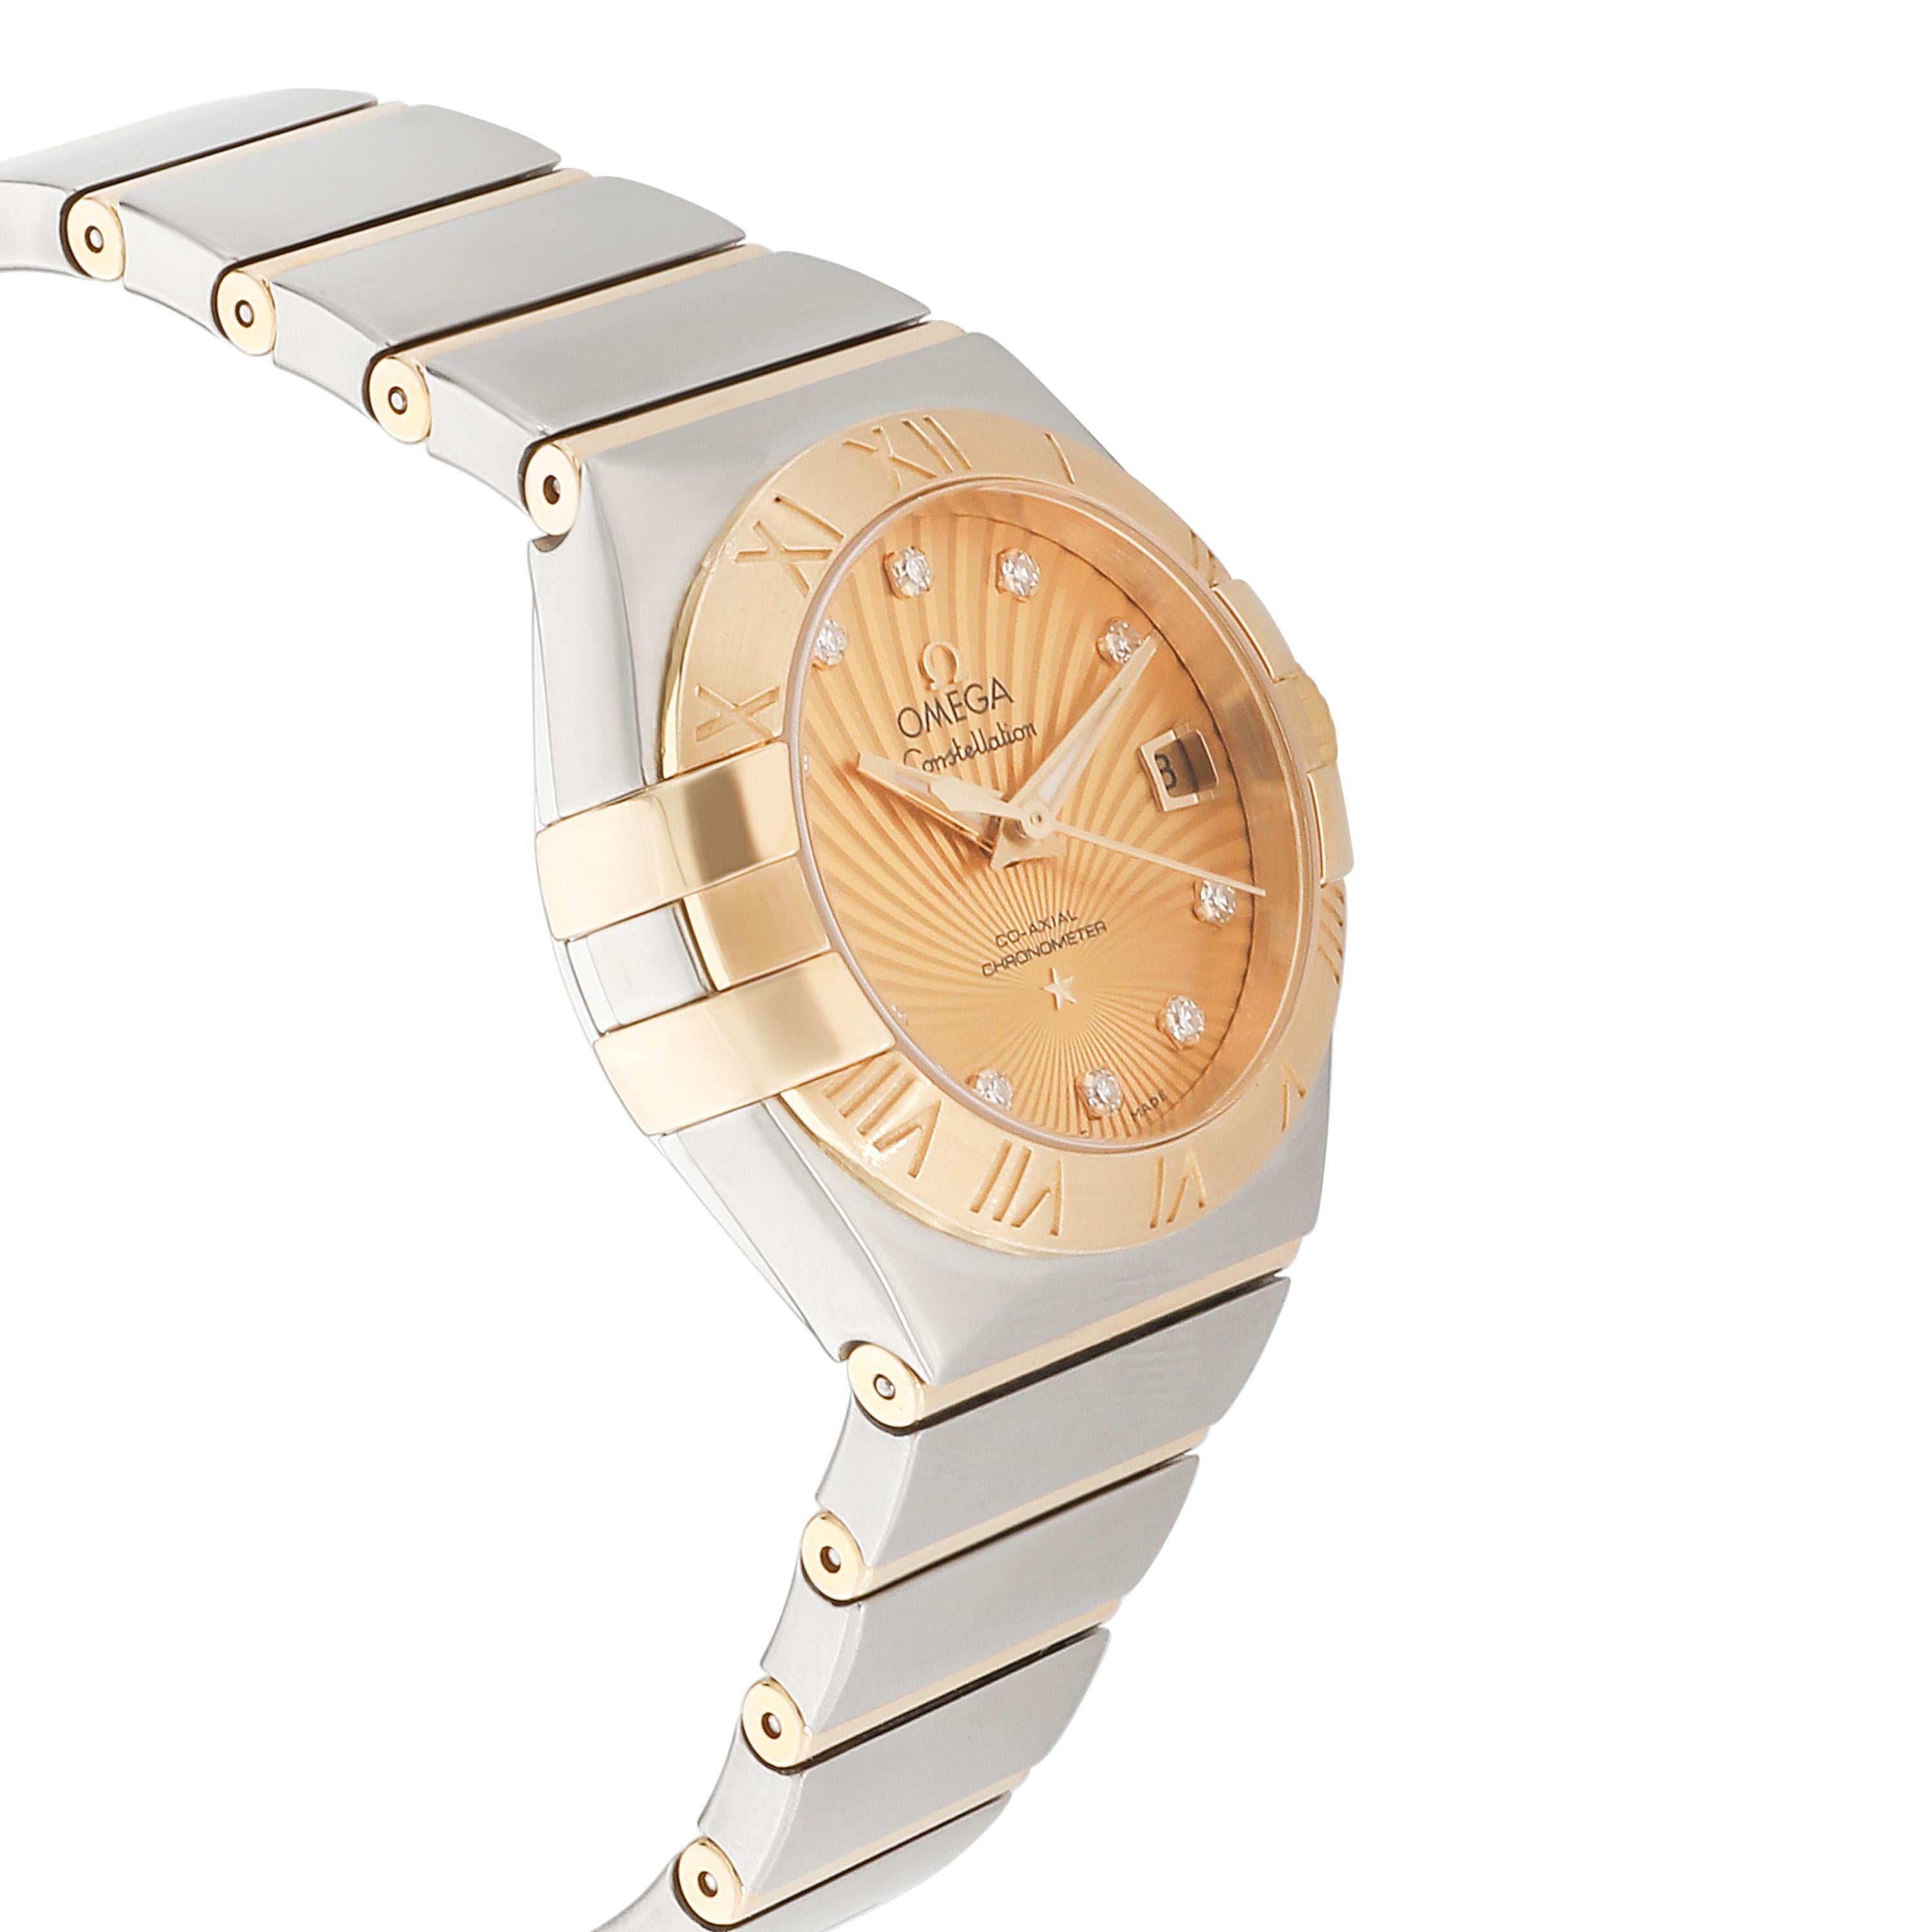 Omega Constellation 123.20.27.20.58.001 Women's Watch in 18k Stainless Steel/Yel For Sale 1